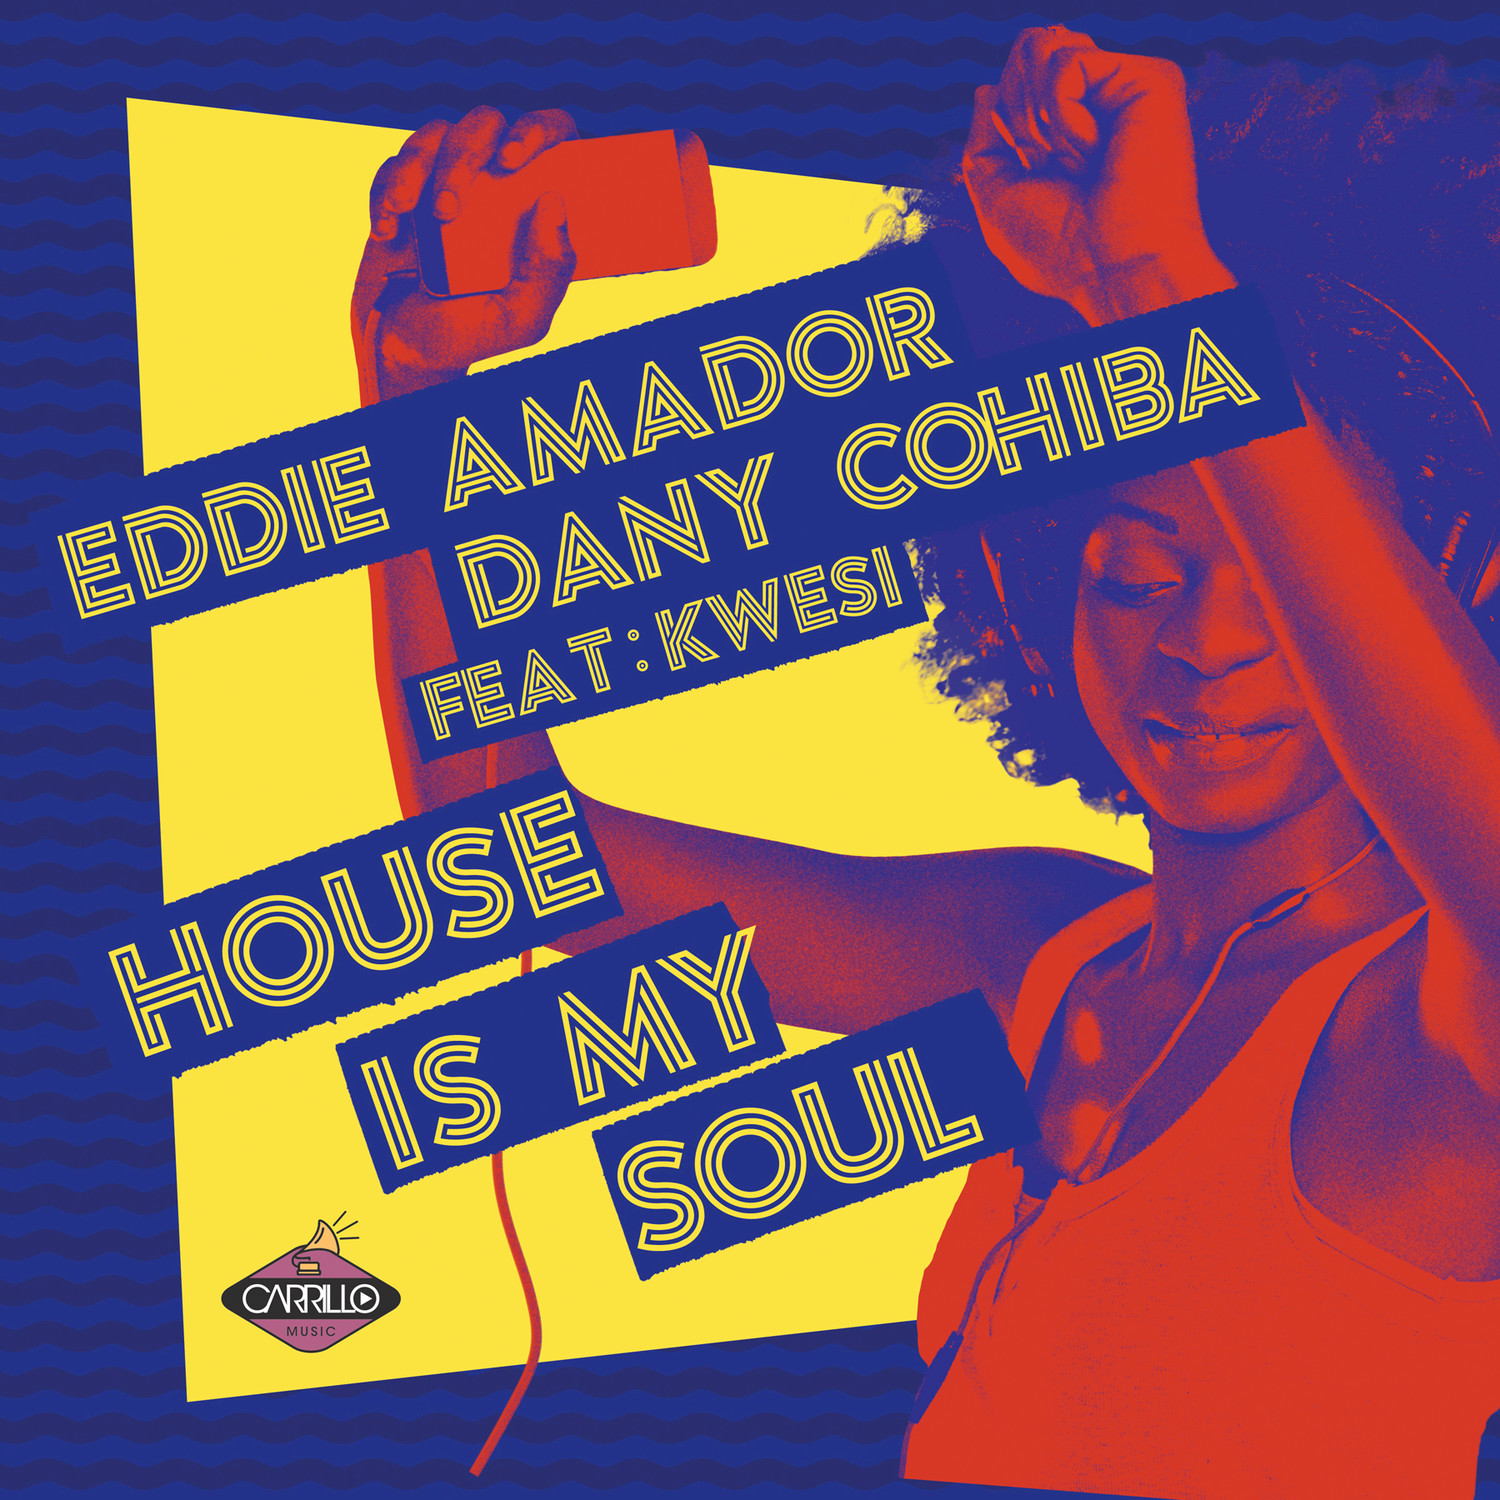 House Is My Soul (Radio Mix)